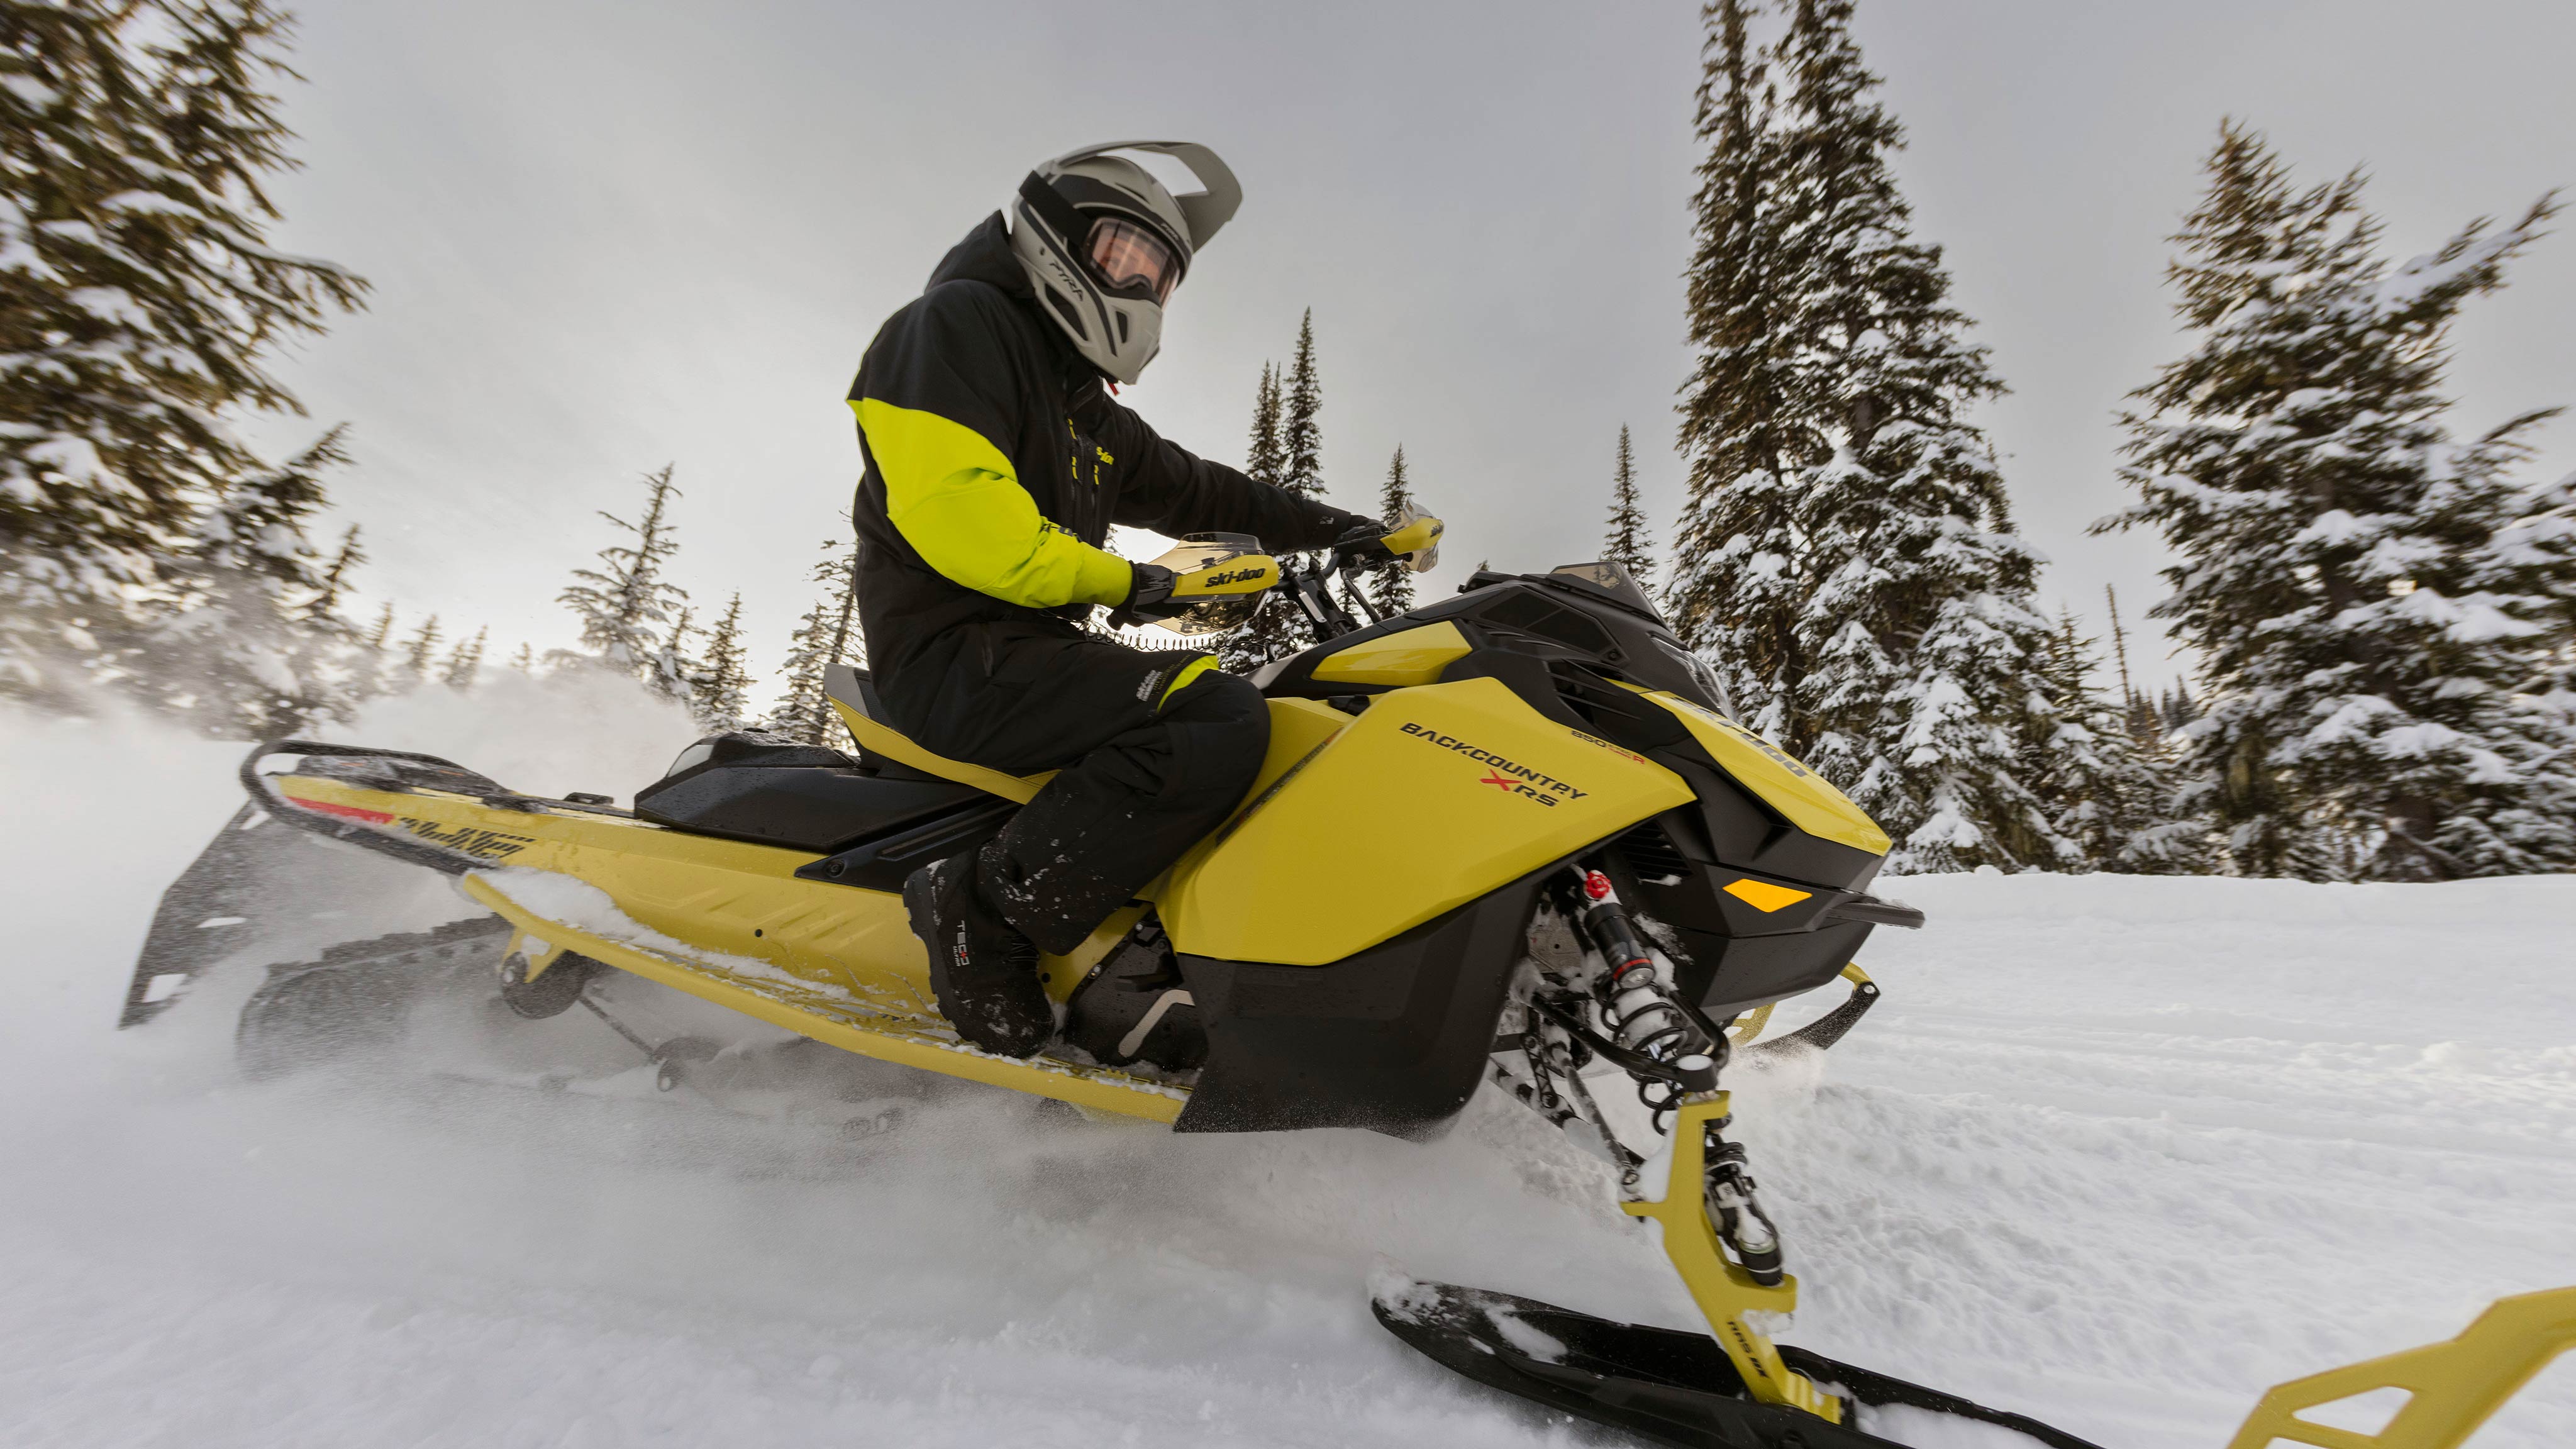 Rider riding a 2025 Ski-Doo Backcountry X RS crossover snowmobile